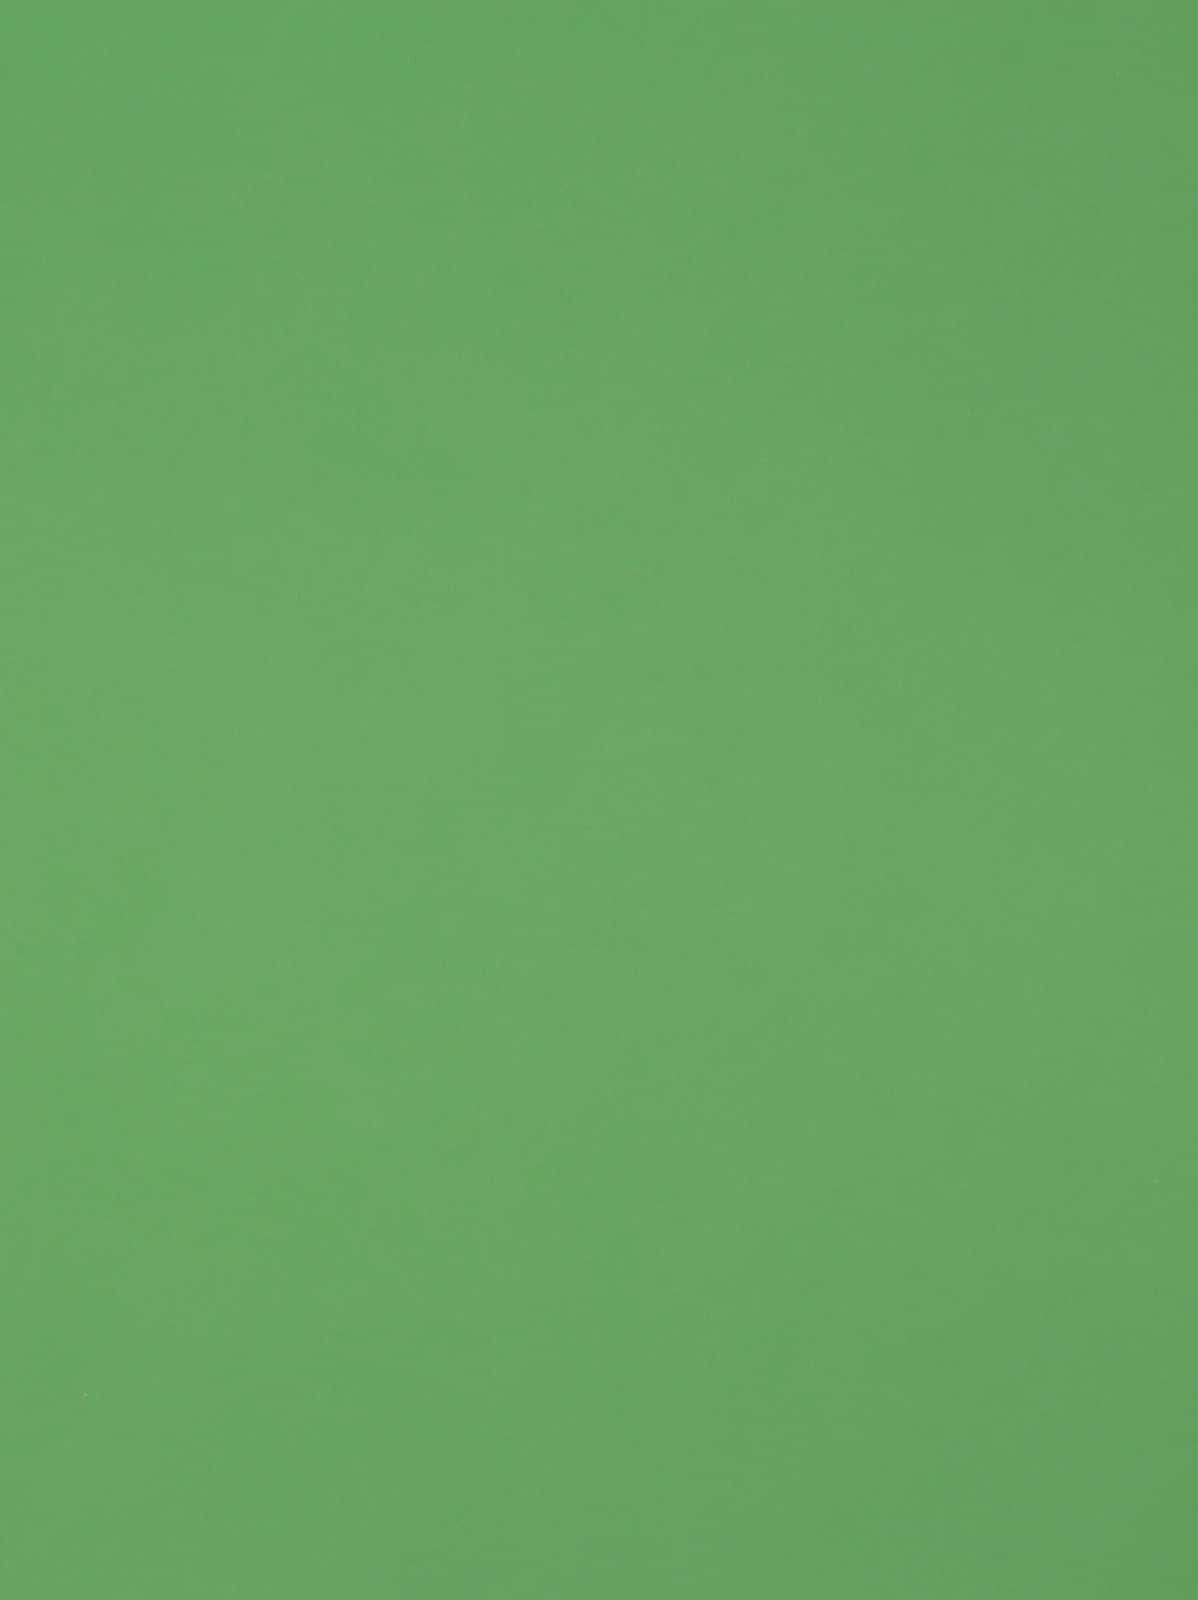 Vibrant Green Solid Background Wallpaper